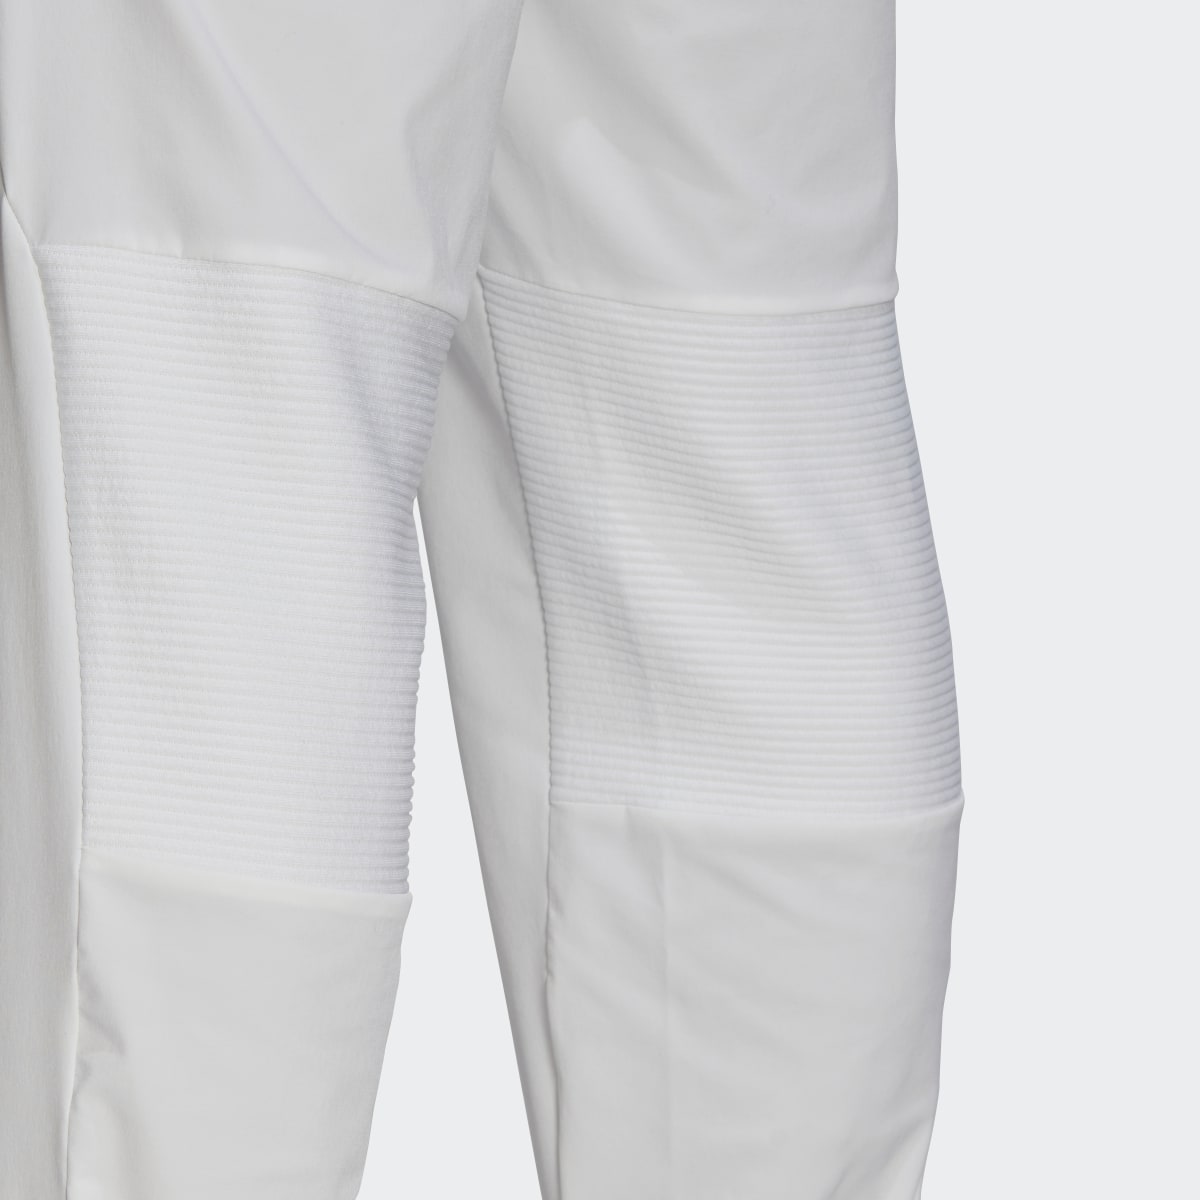 Adidas Designed for Gameday Tracksuit Bottoms. 8